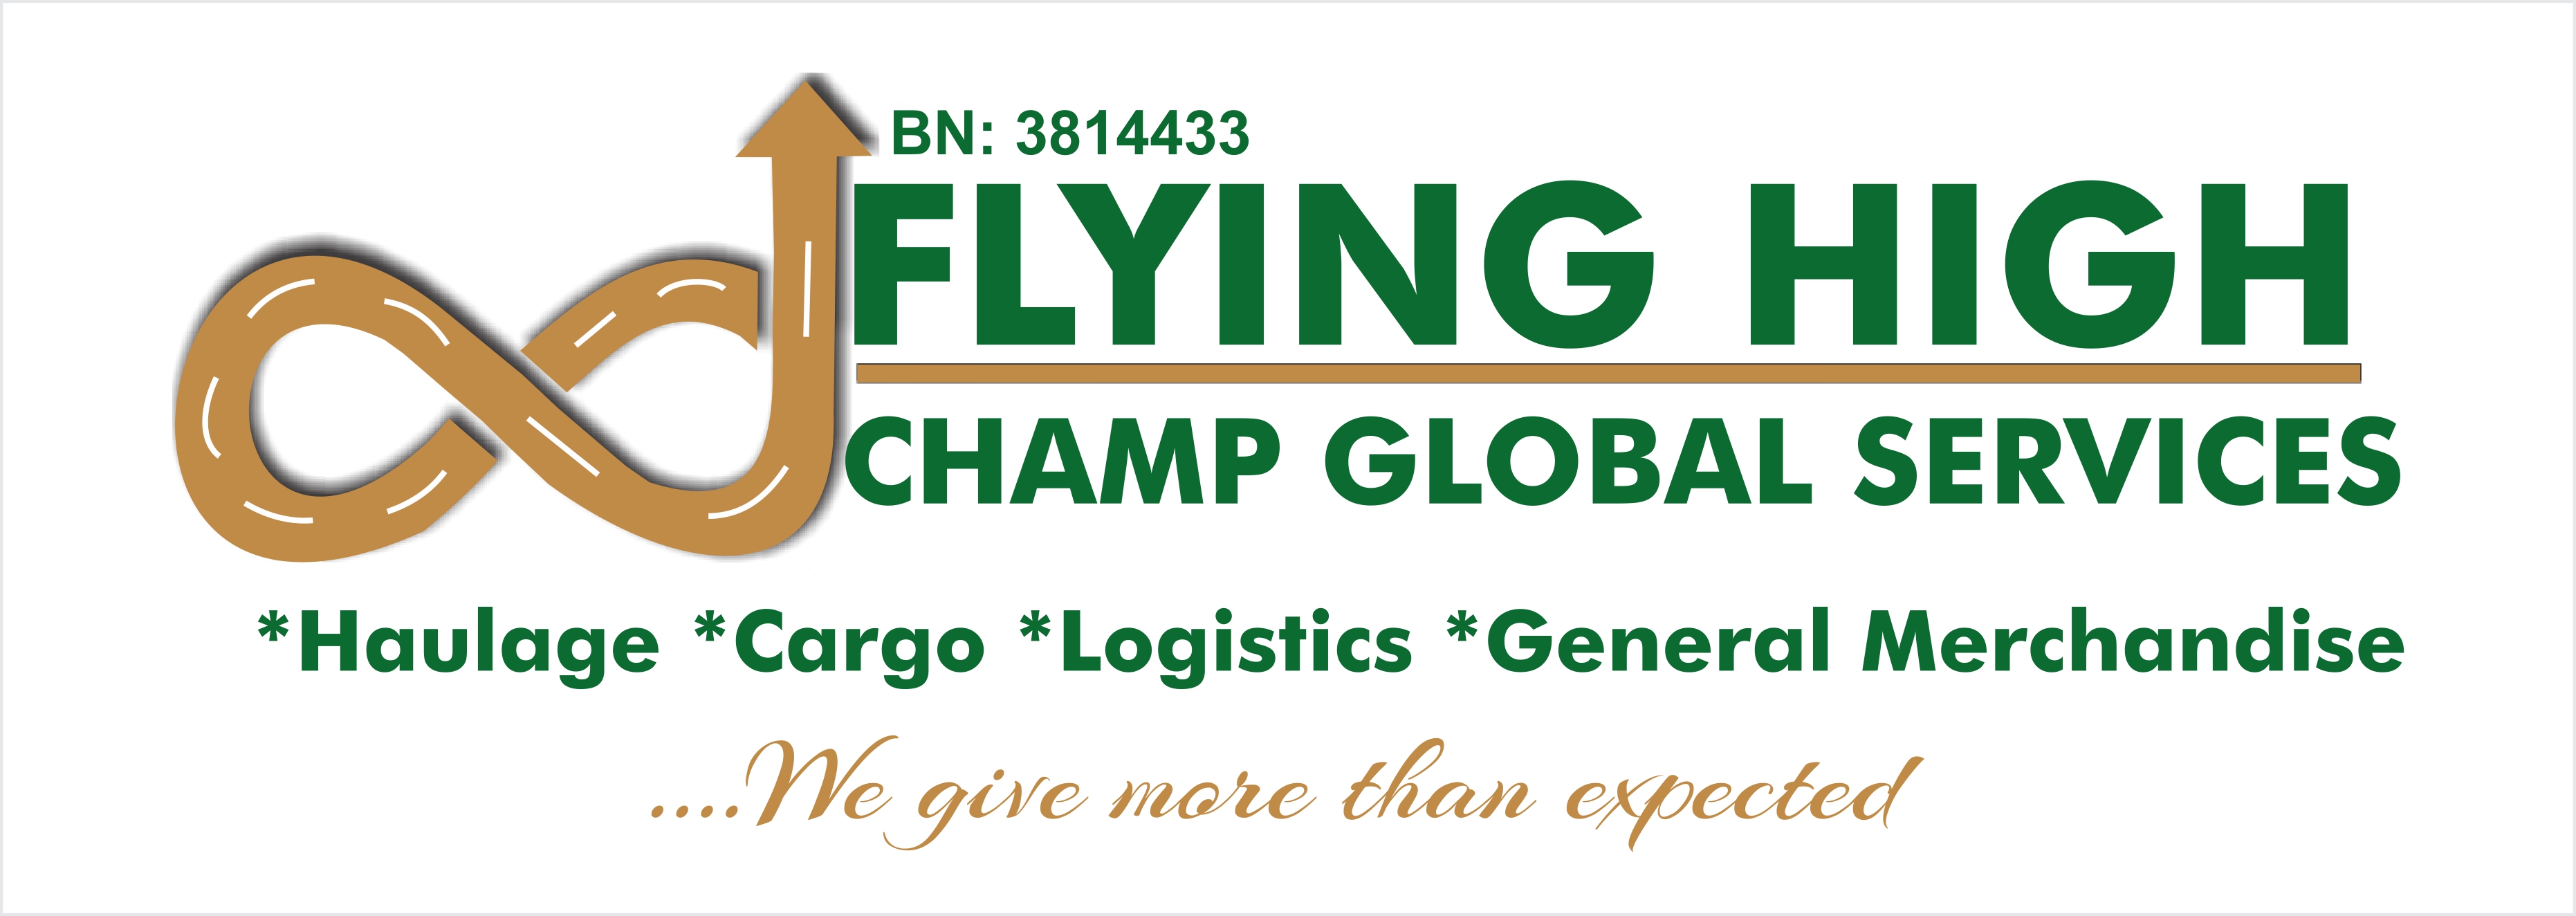 FLYING HIGH CHAMP GLOBAL SERVICES provider